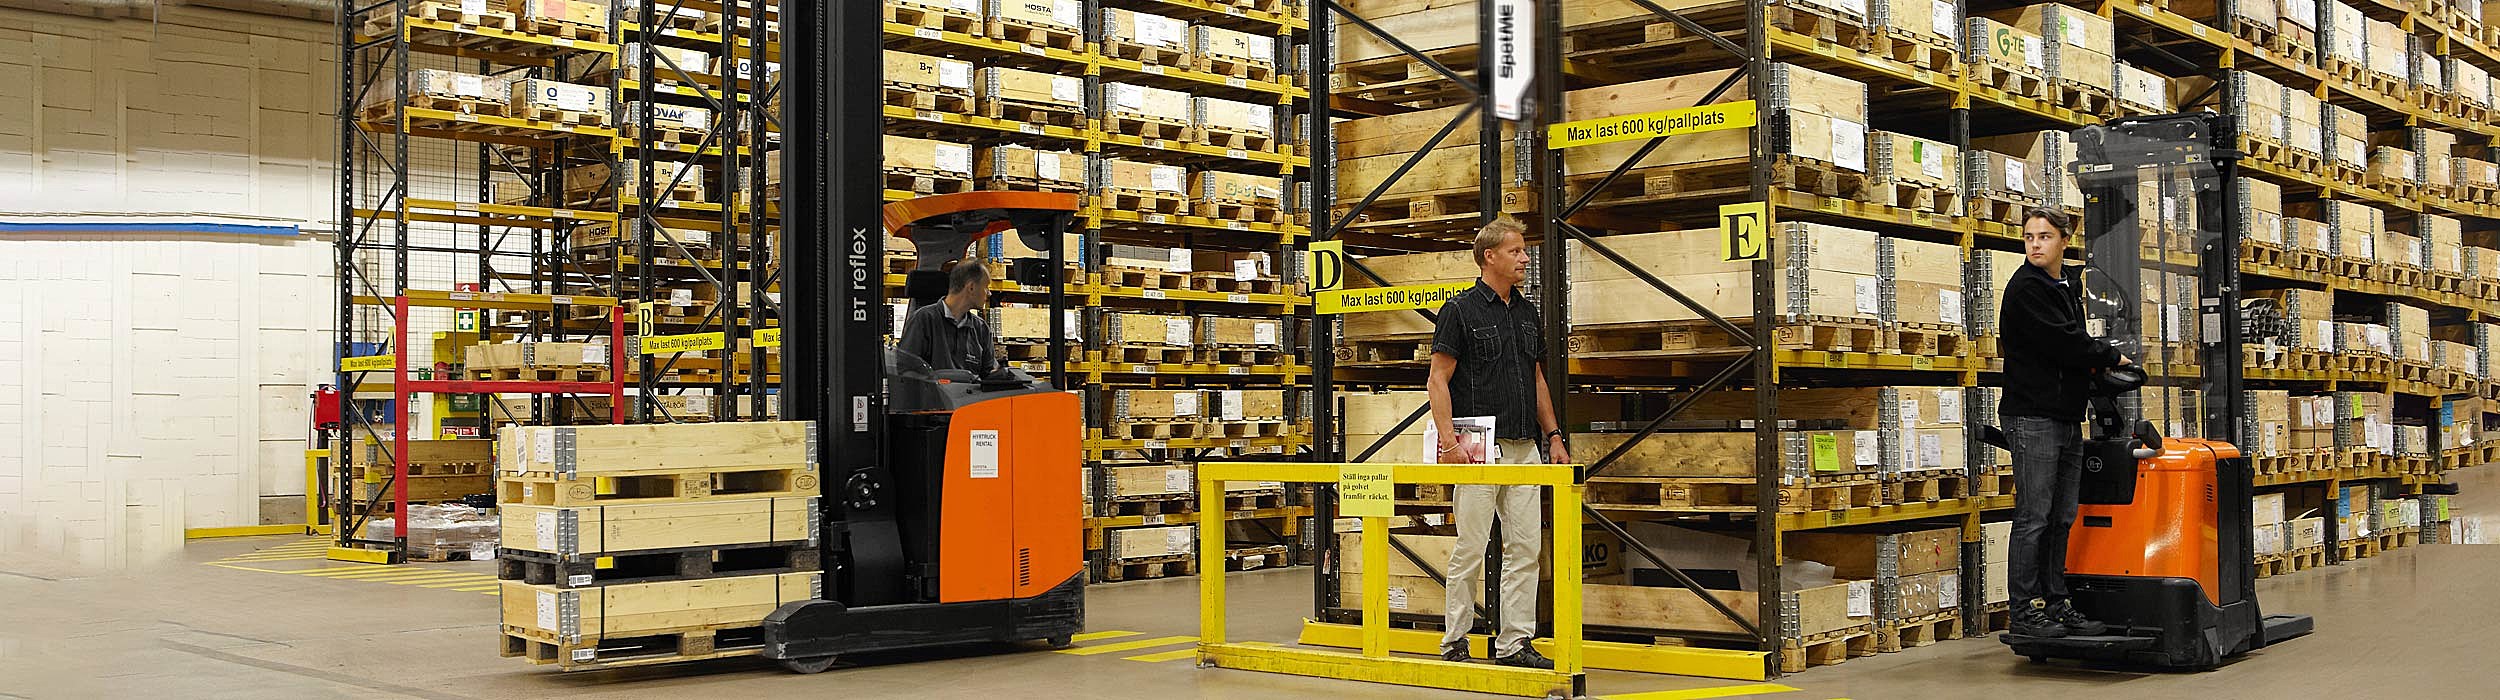 Spotme Warehouse Safety Toyota Material Handling Europe